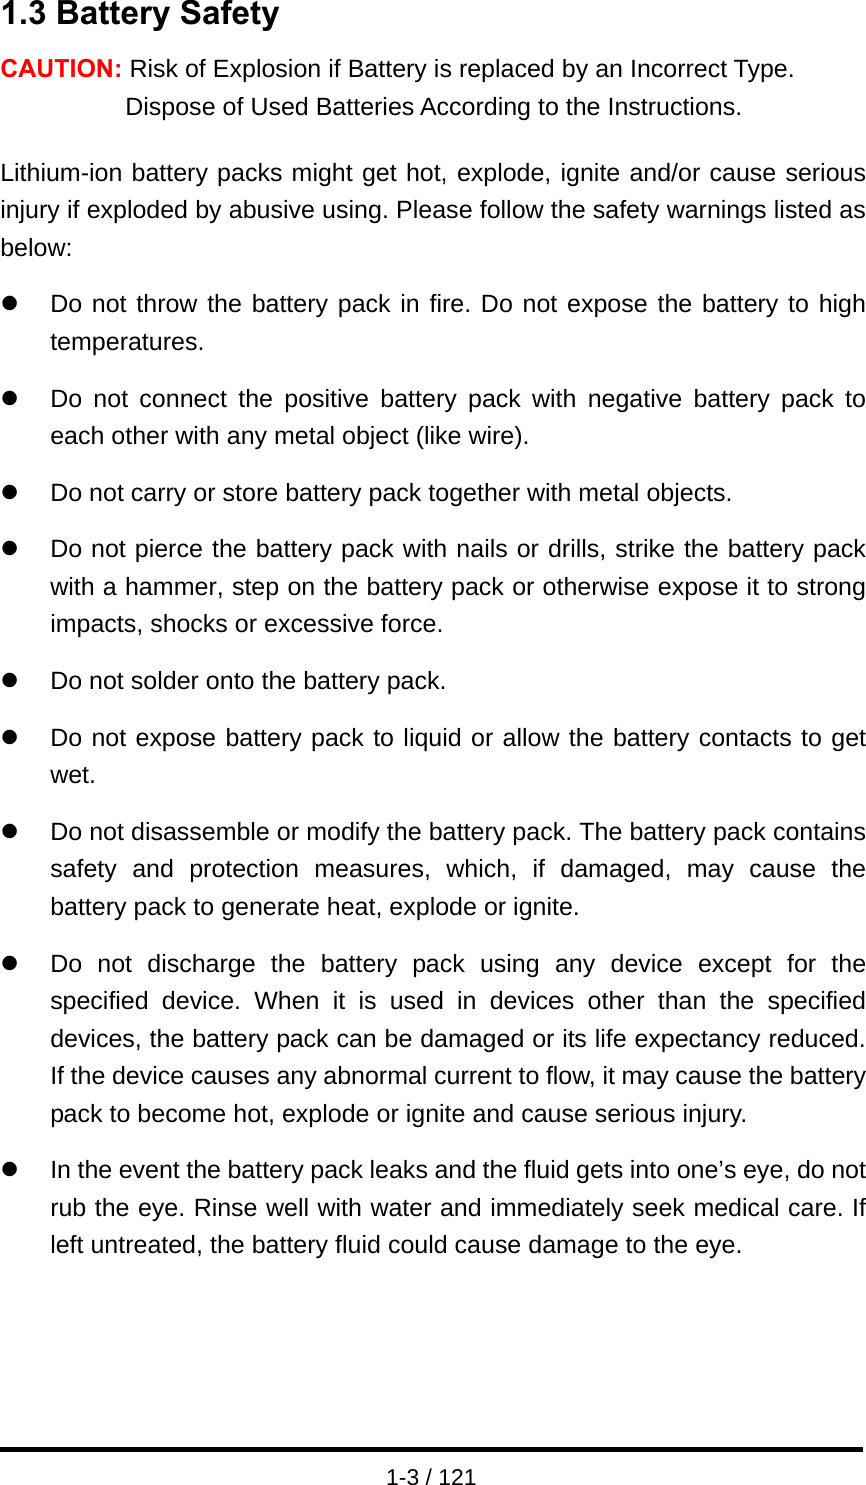  1-3 / 121 1.3 Battery Safety CAUTION: Risk of Explosion if Battery is replaced by an Incorrect Type. Dispose of Used Batteries According to the Instructions.  Lithium-ion battery packs might get hot, explode, ignite and/or cause serious injury if exploded by abusive using. Please follow the safety warnings listed as below:  z  Do not throw the battery pack in fire. Do not expose the battery to high temperatures.  z  Do not connect the positive battery pack with negative battery pack to each other with any metal object (like wire).  z  Do not carry or store battery pack together with metal objects.  z  Do not pierce the battery pack with nails or drills, strike the battery pack with a hammer, step on the battery pack or otherwise expose it to strong impacts, shocks or excessive force.  z  Do not solder onto the battery pack.  z  Do not expose battery pack to liquid or allow the battery contacts to get wet.  z  Do not disassemble or modify the battery pack. The battery pack contains safety and protection measures, which, if damaged, may cause the battery pack to generate heat, explode or ignite.  z  Do not discharge the battery pack using any device except for the specified device. When it is used in devices other than the specified devices, the battery pack can be damaged or its life expectancy reduced. If the device causes any abnormal current to flow, it may cause the battery pack to become hot, explode or ignite and cause serious injury.  z  In the event the battery pack leaks and the fluid gets into one’s eye, do not rub the eye. Rinse well with water and immediately seek medical care. If left untreated, the battery fluid could cause damage to the eye.     